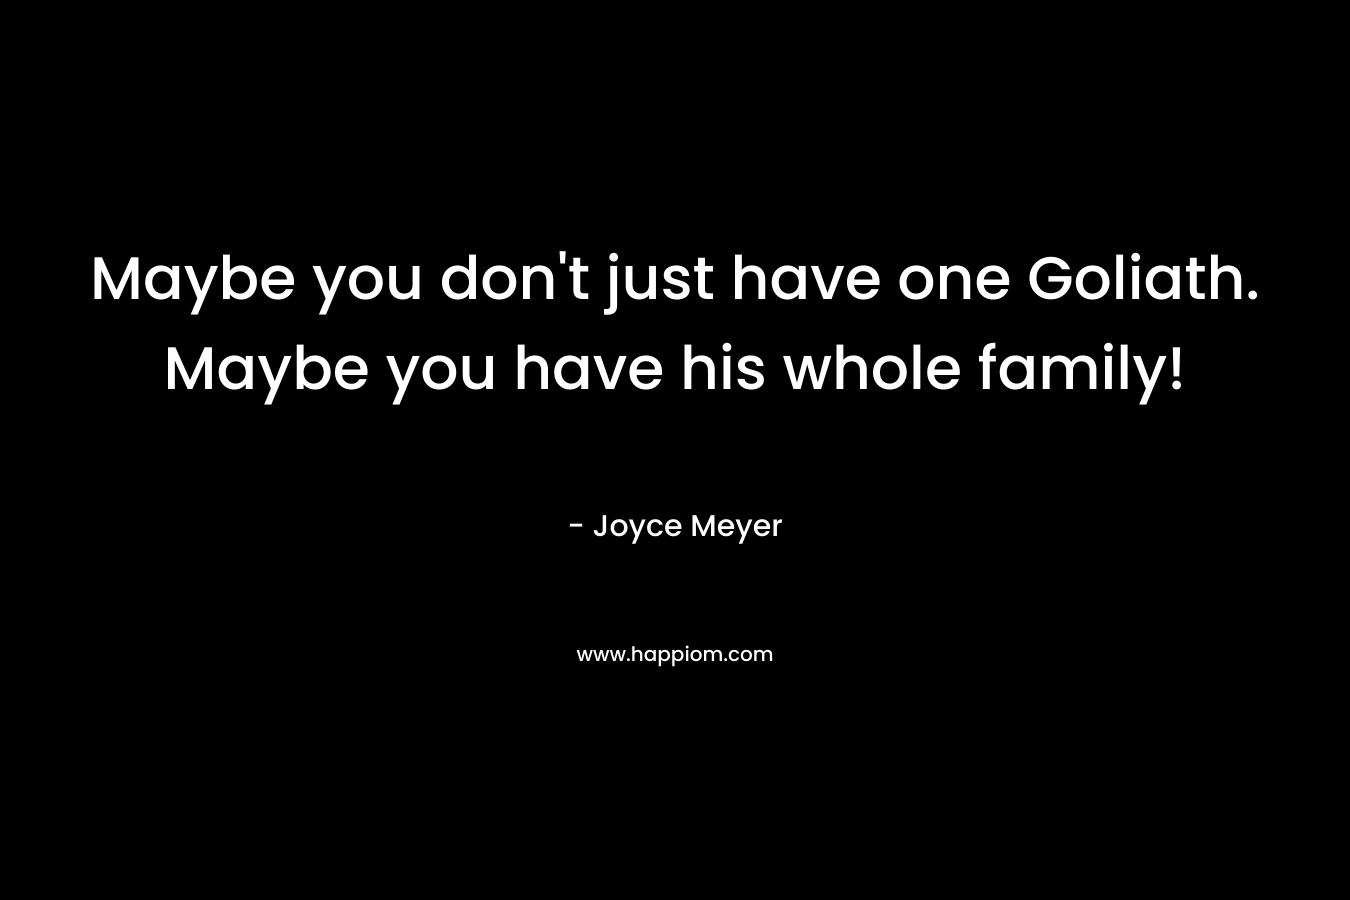 Maybe you don’t just have one Goliath. Maybe you have his whole family! – Joyce Meyer